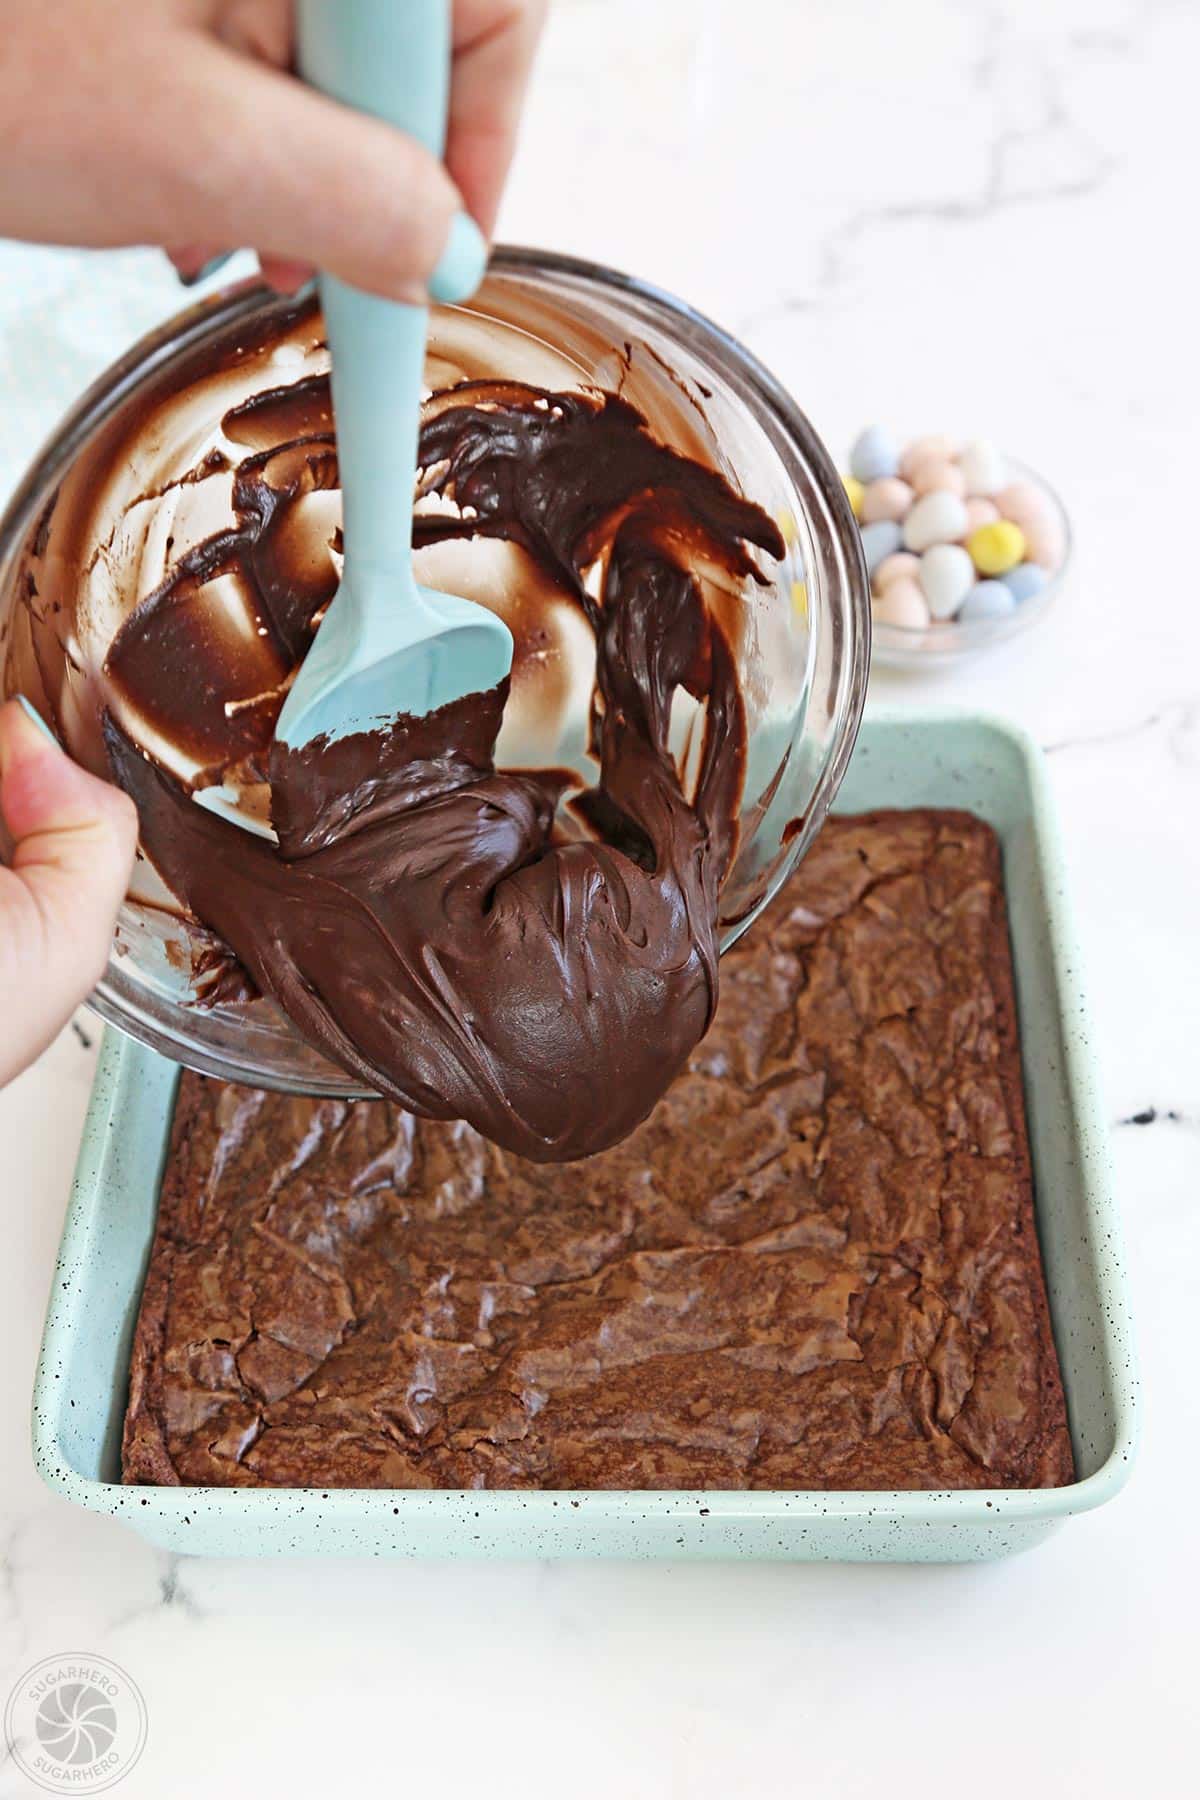 Scraping chocolate frosting on top of a pan of brownies.